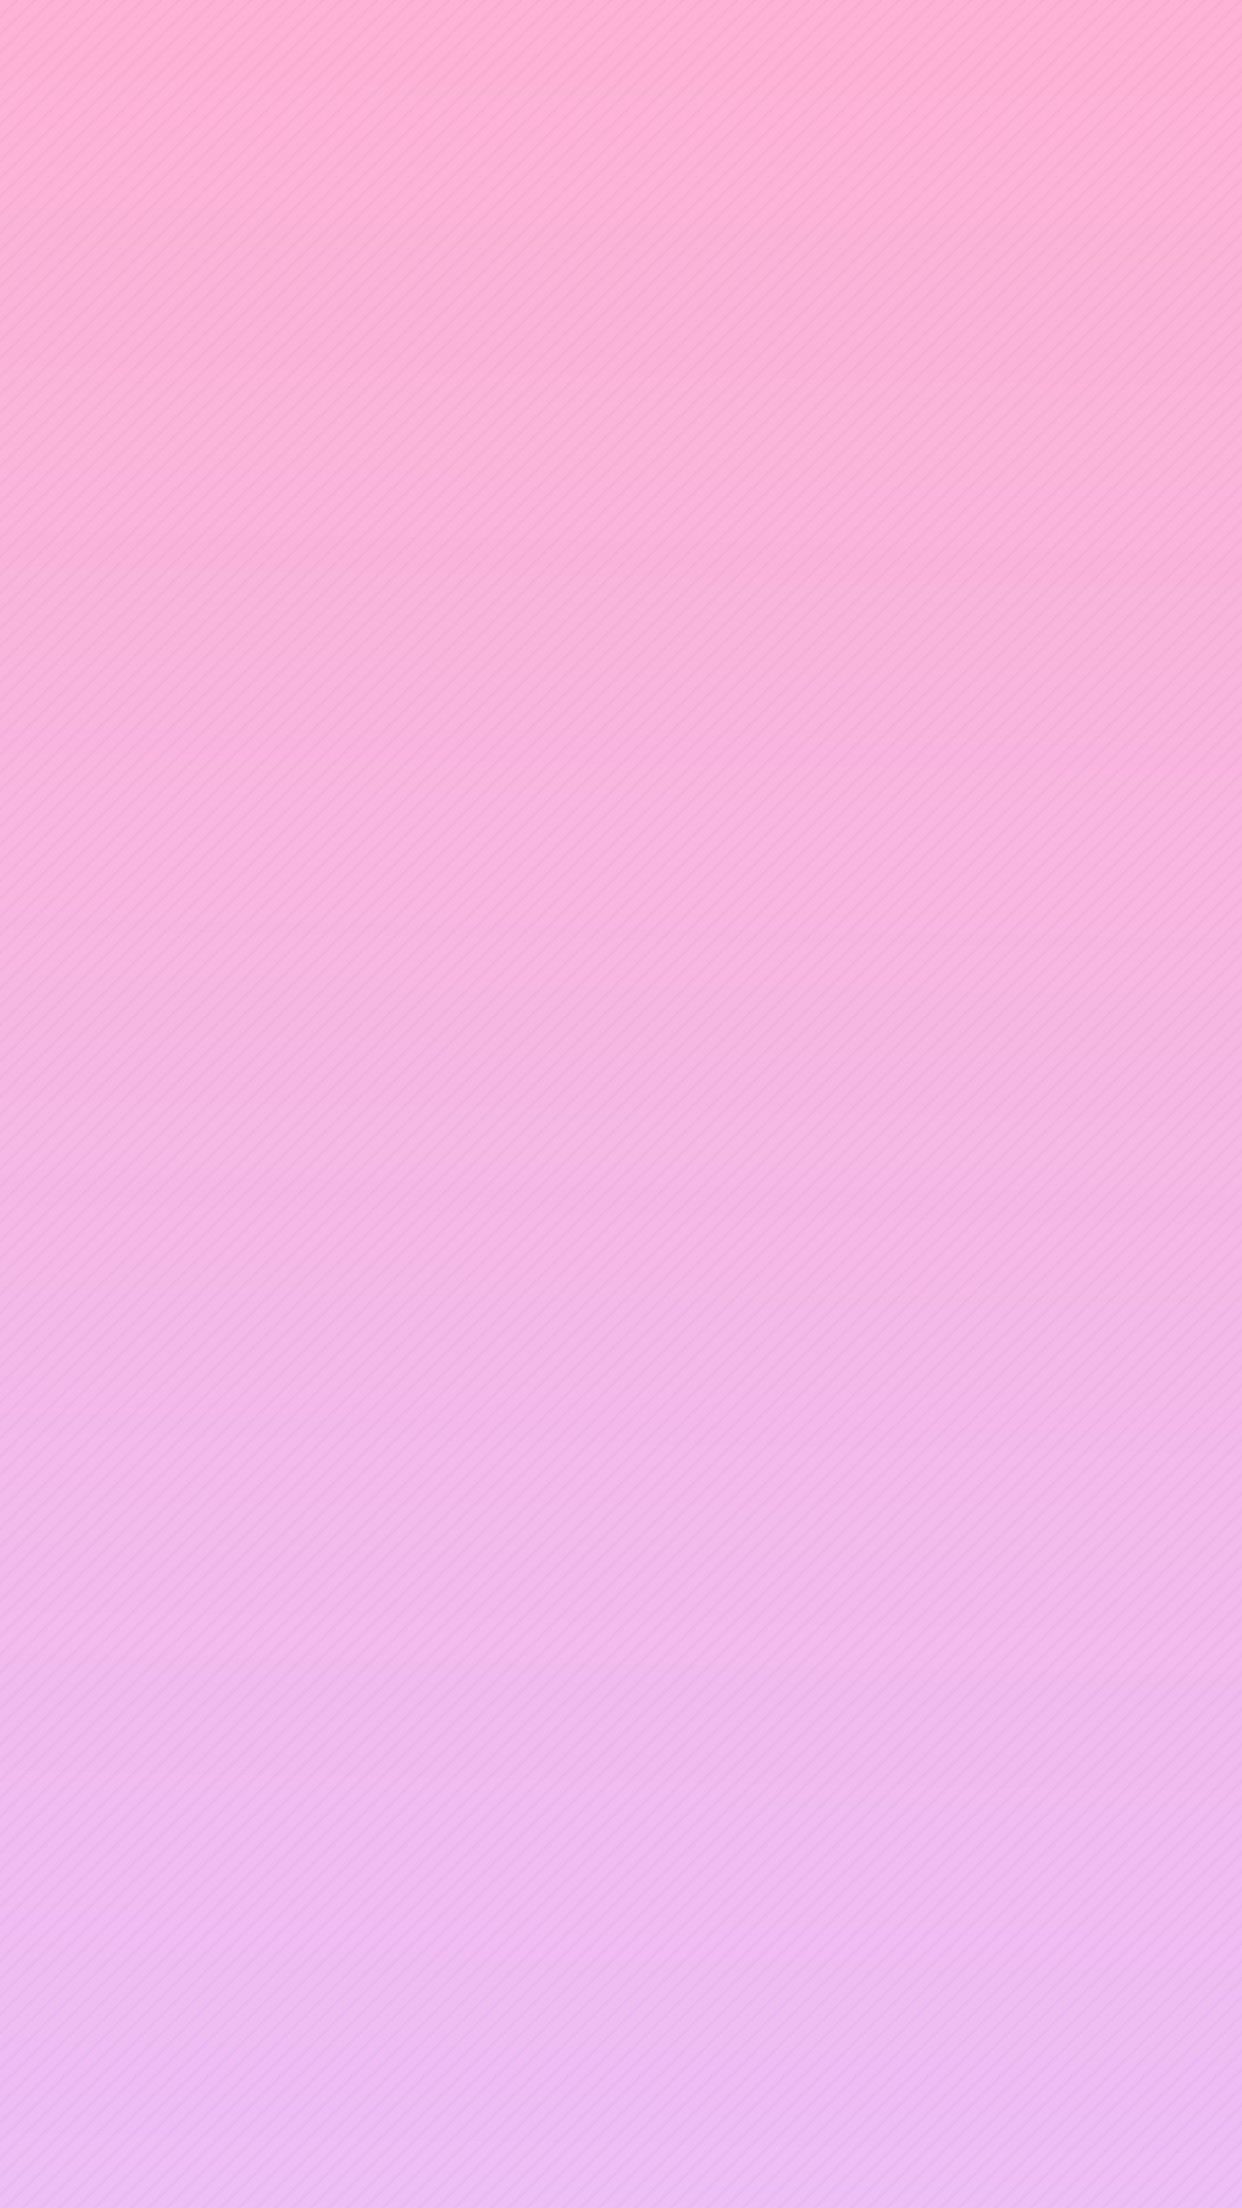 1242x2208  Wallpaper, background, iPhone, Android, HD, pink, purple,  gradient,